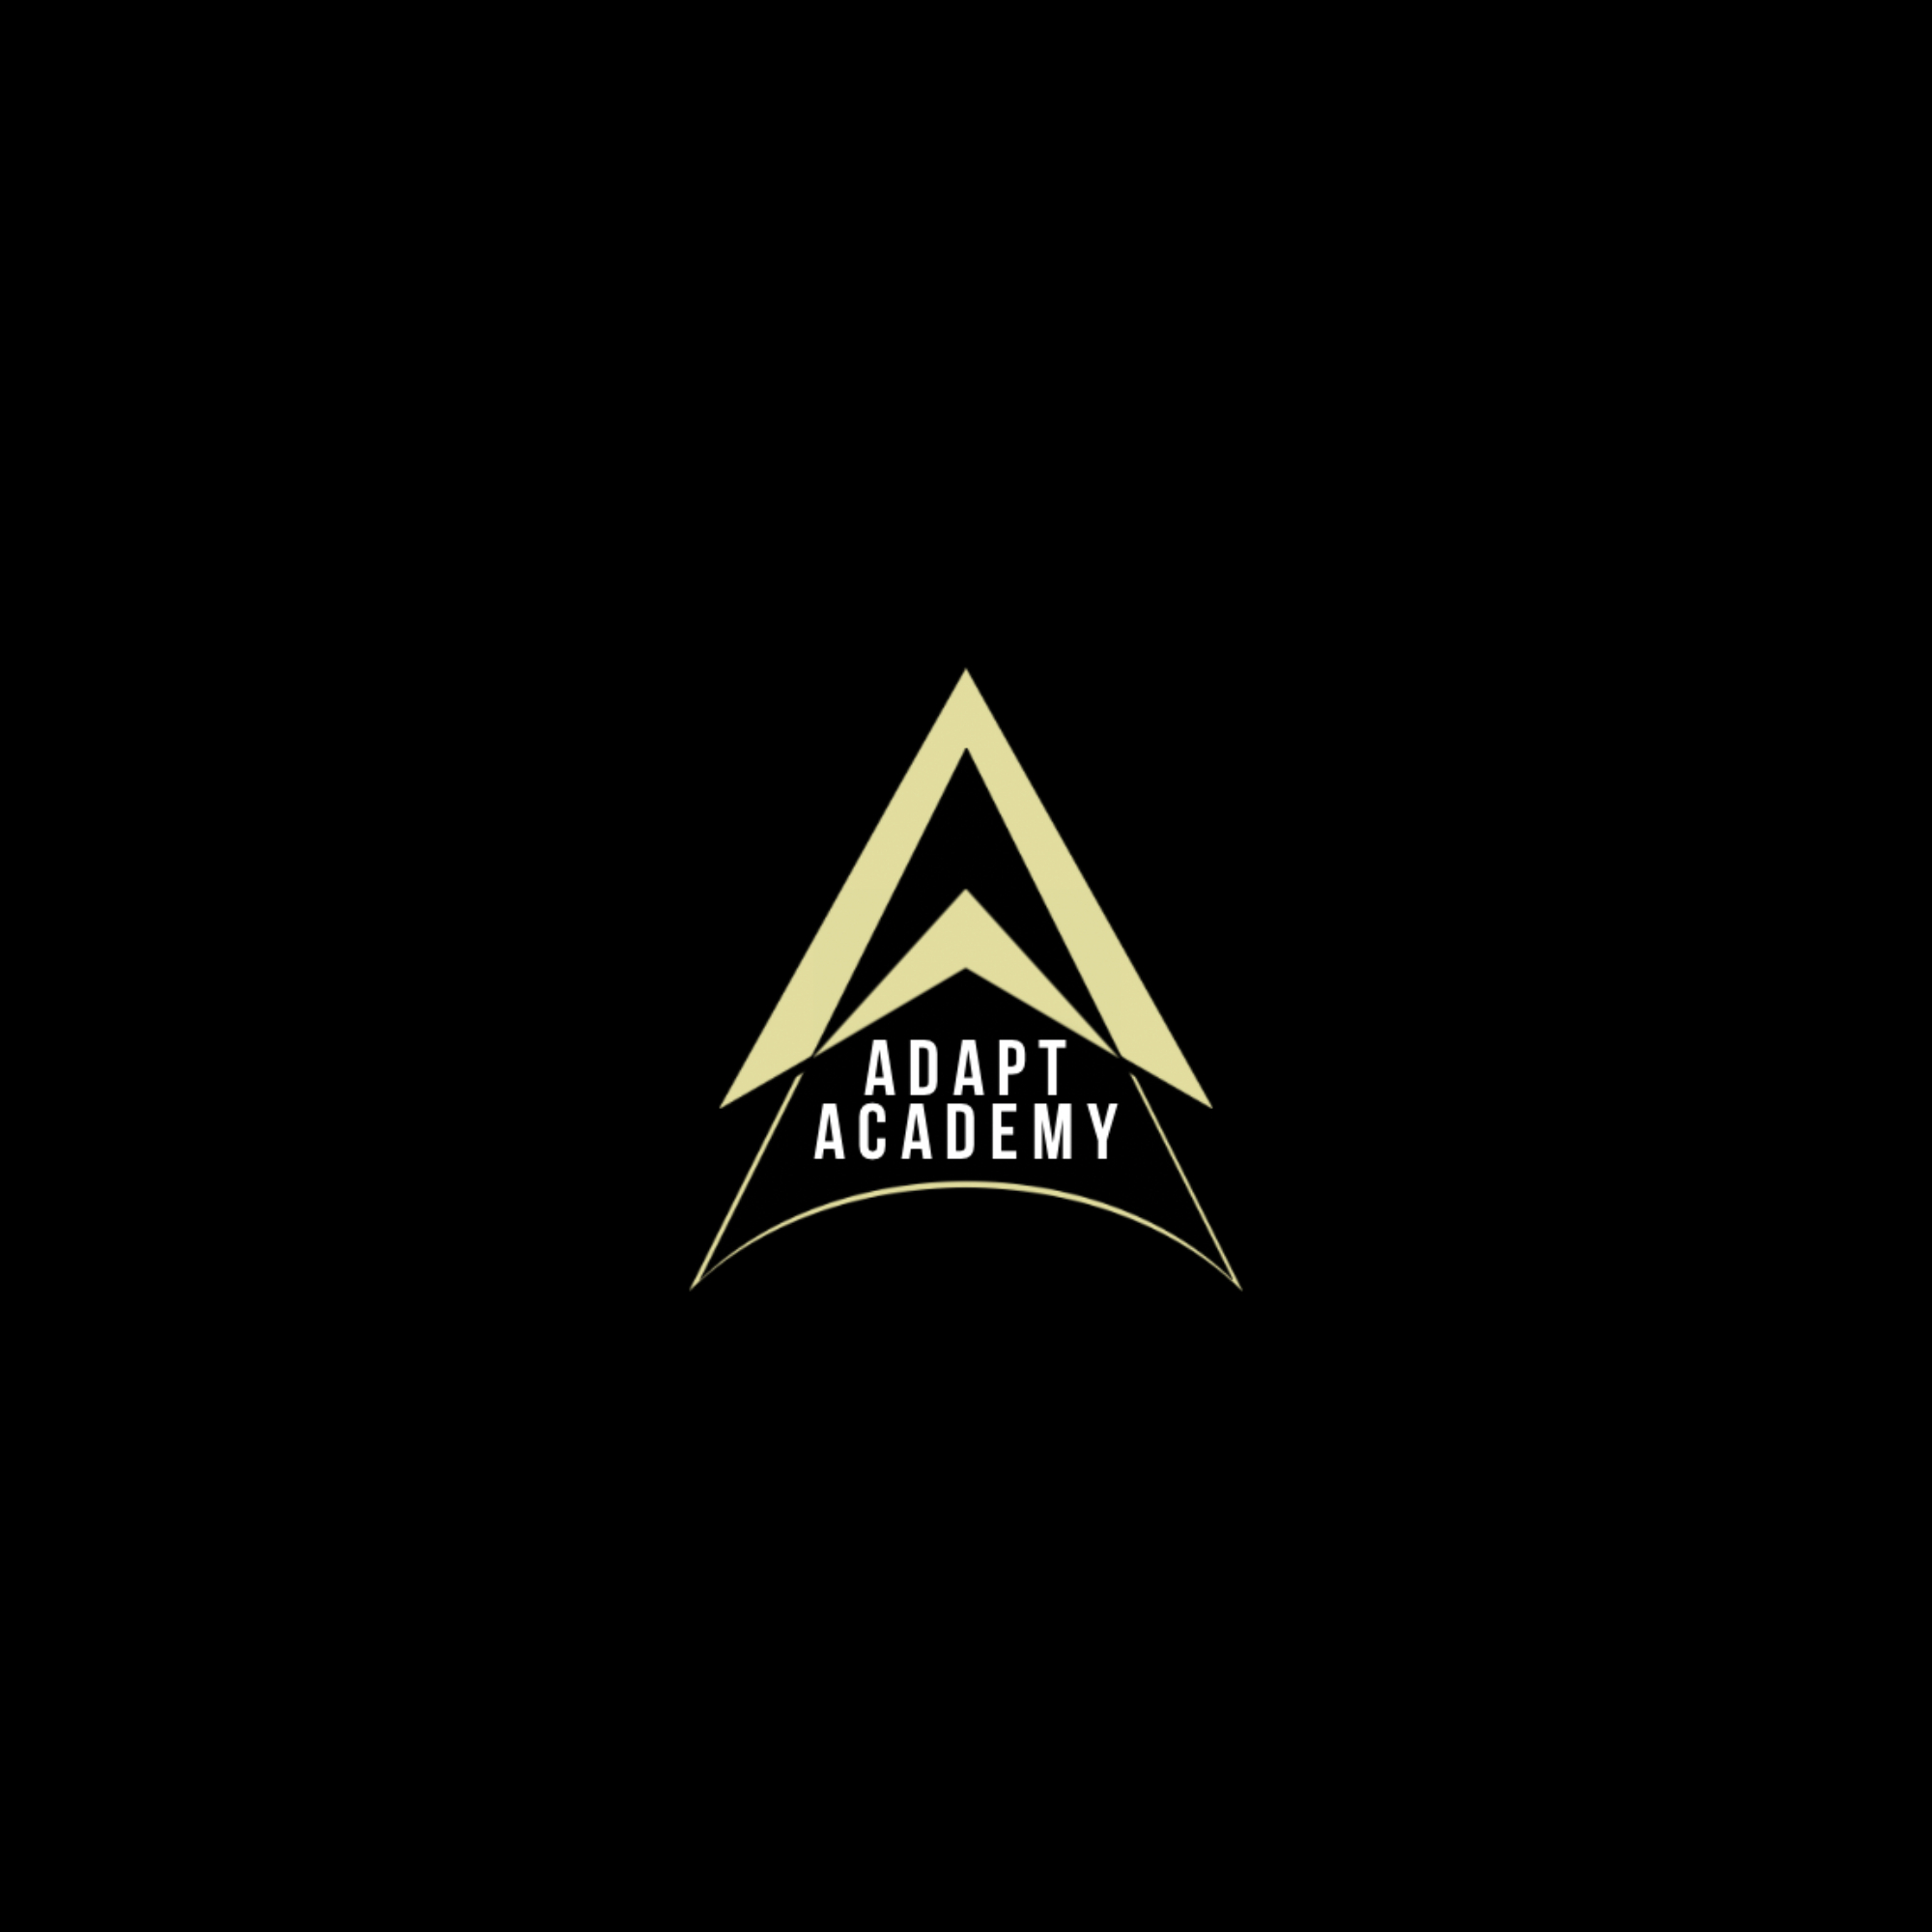 The official logo of ADAPT Academy SD